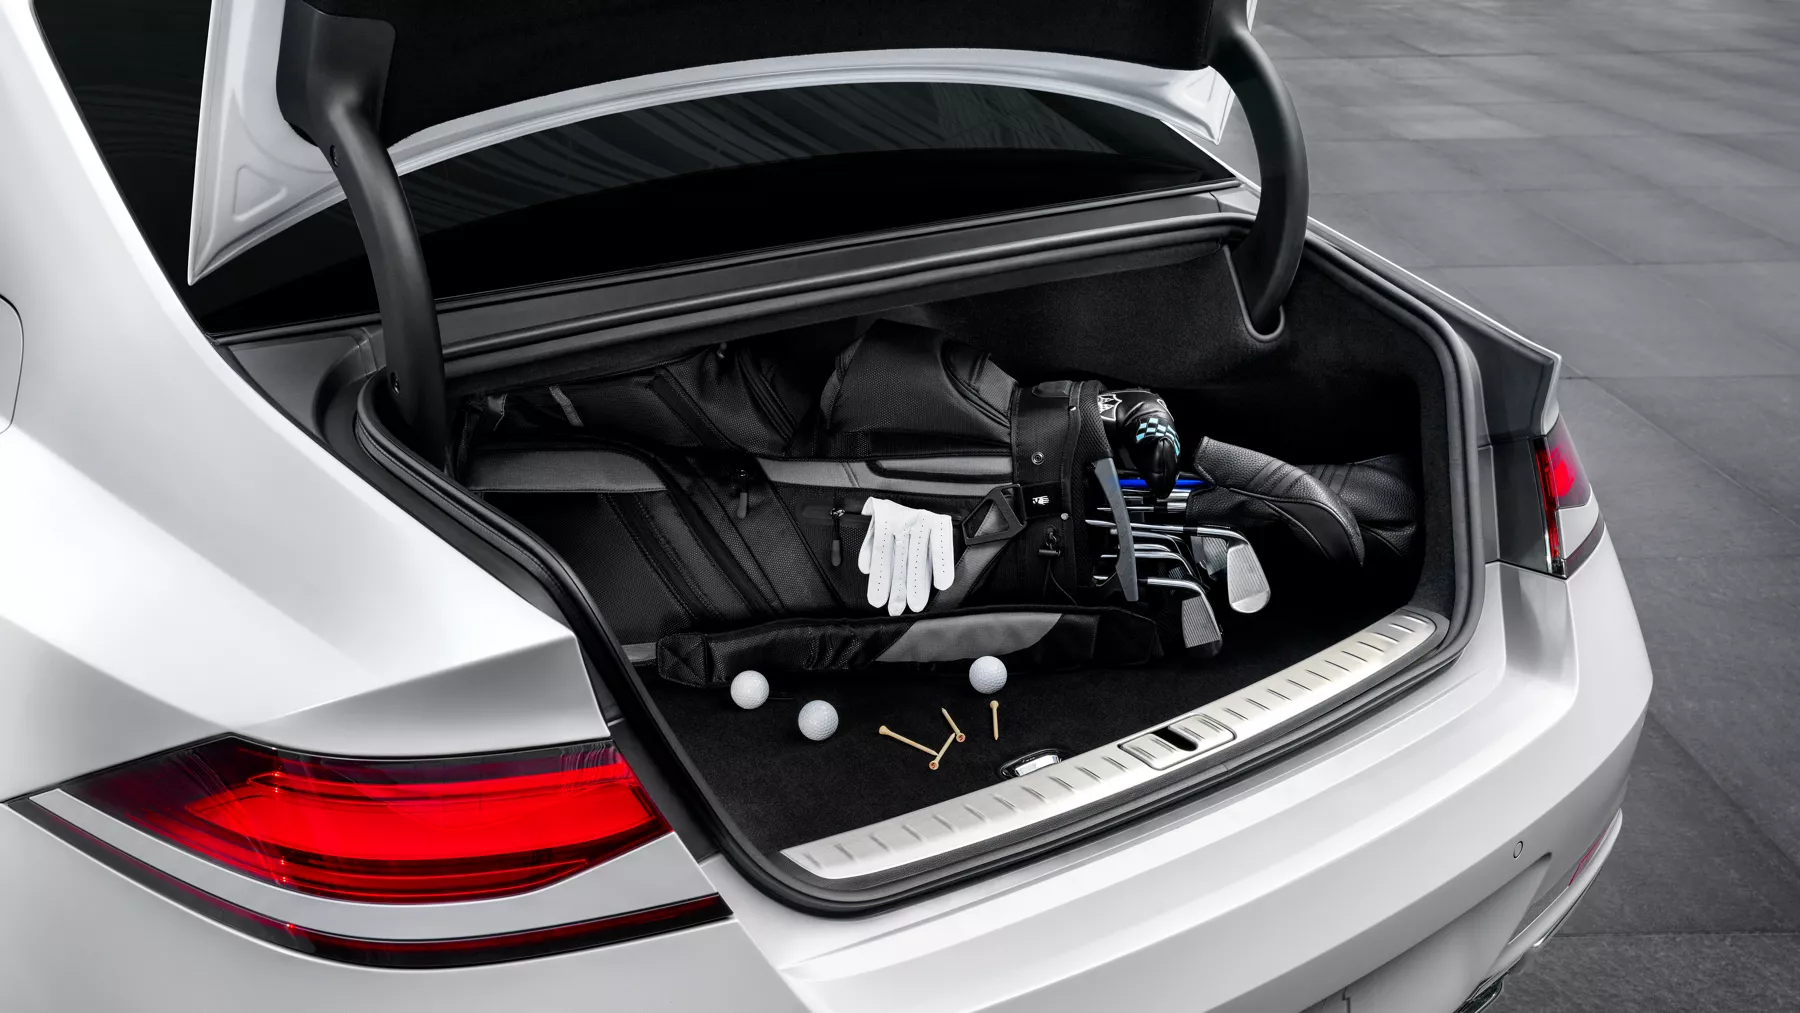 G90 opened trunk with golf bag and clubs inside.